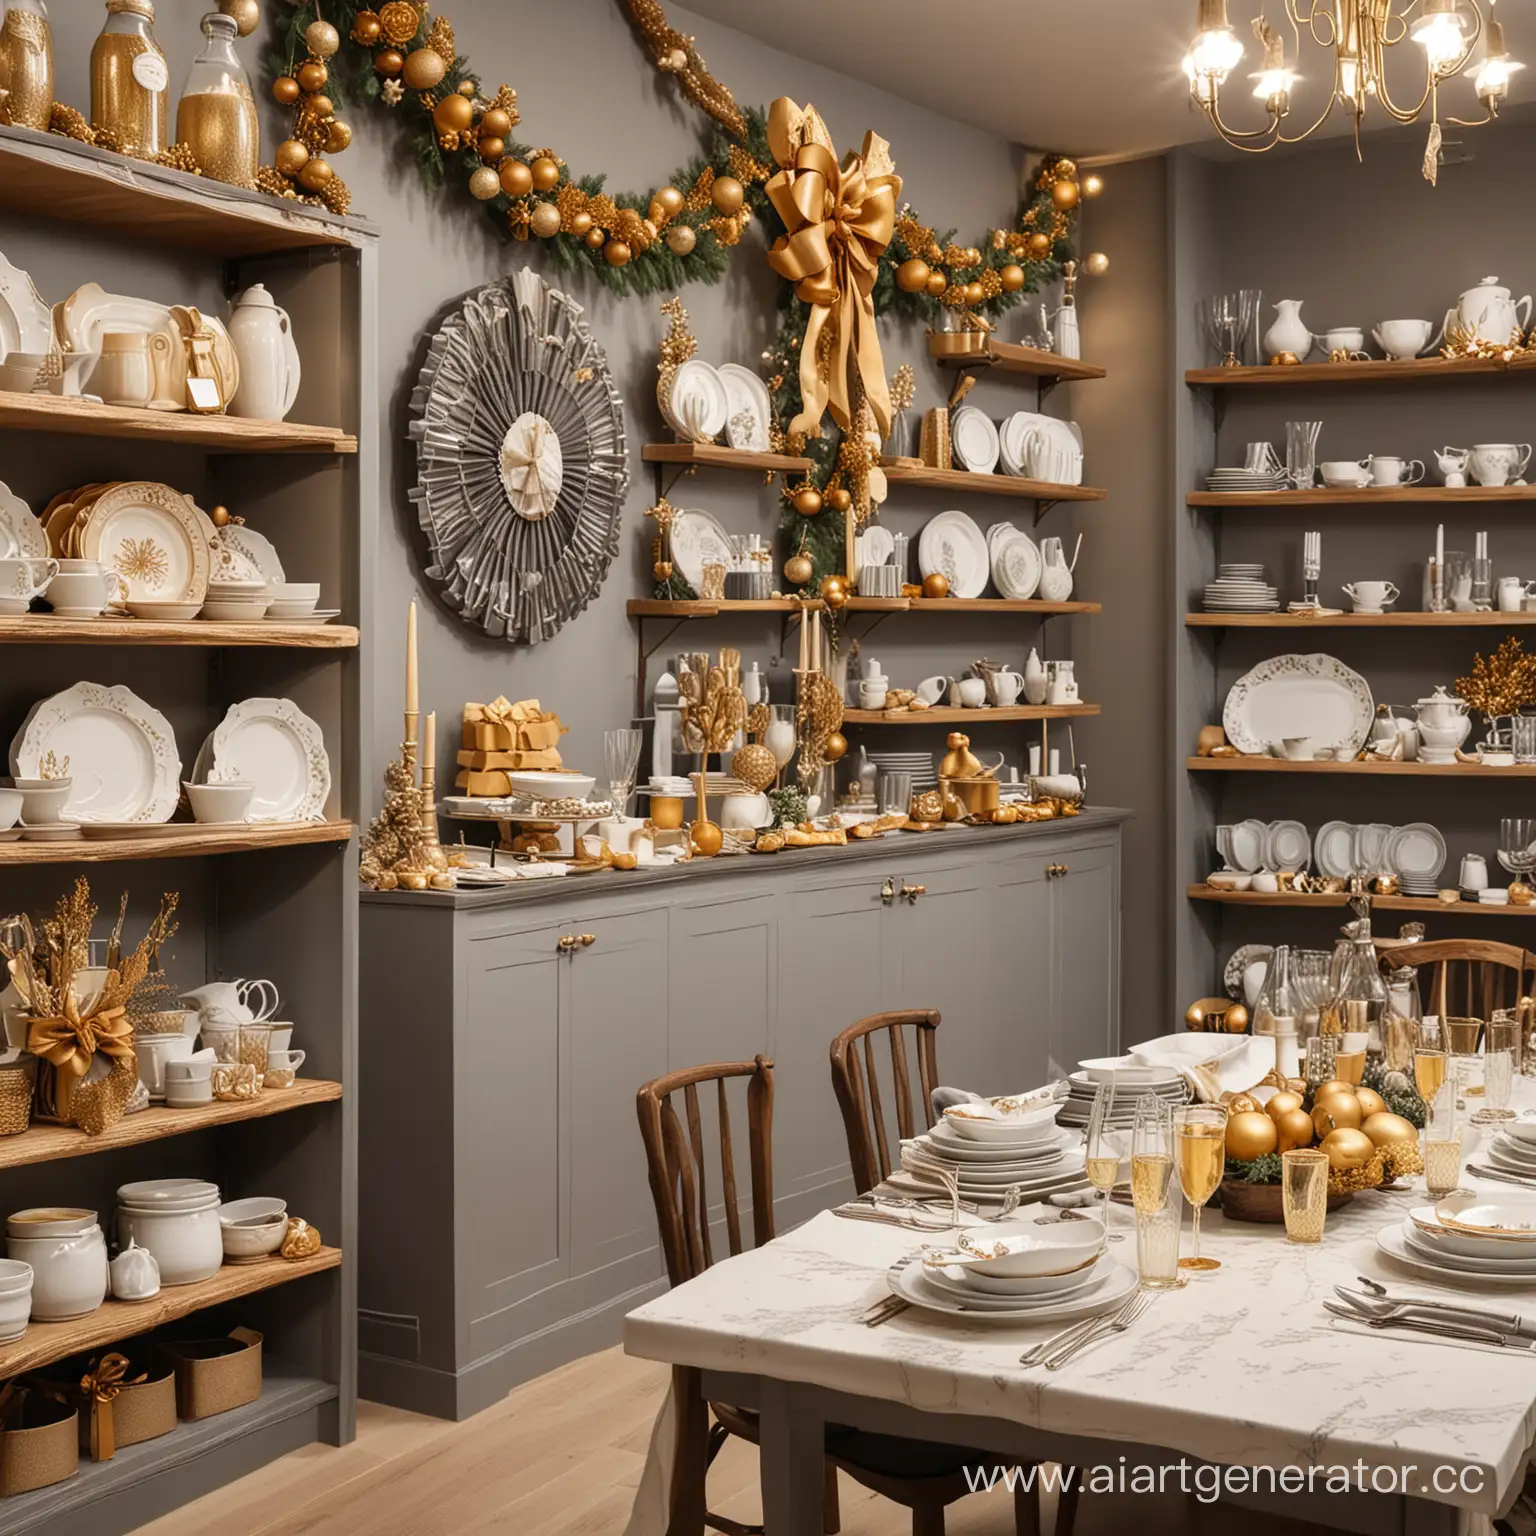 Festive-New-Years-Table-Setting-Display-in-Decorated-Tableware-Store